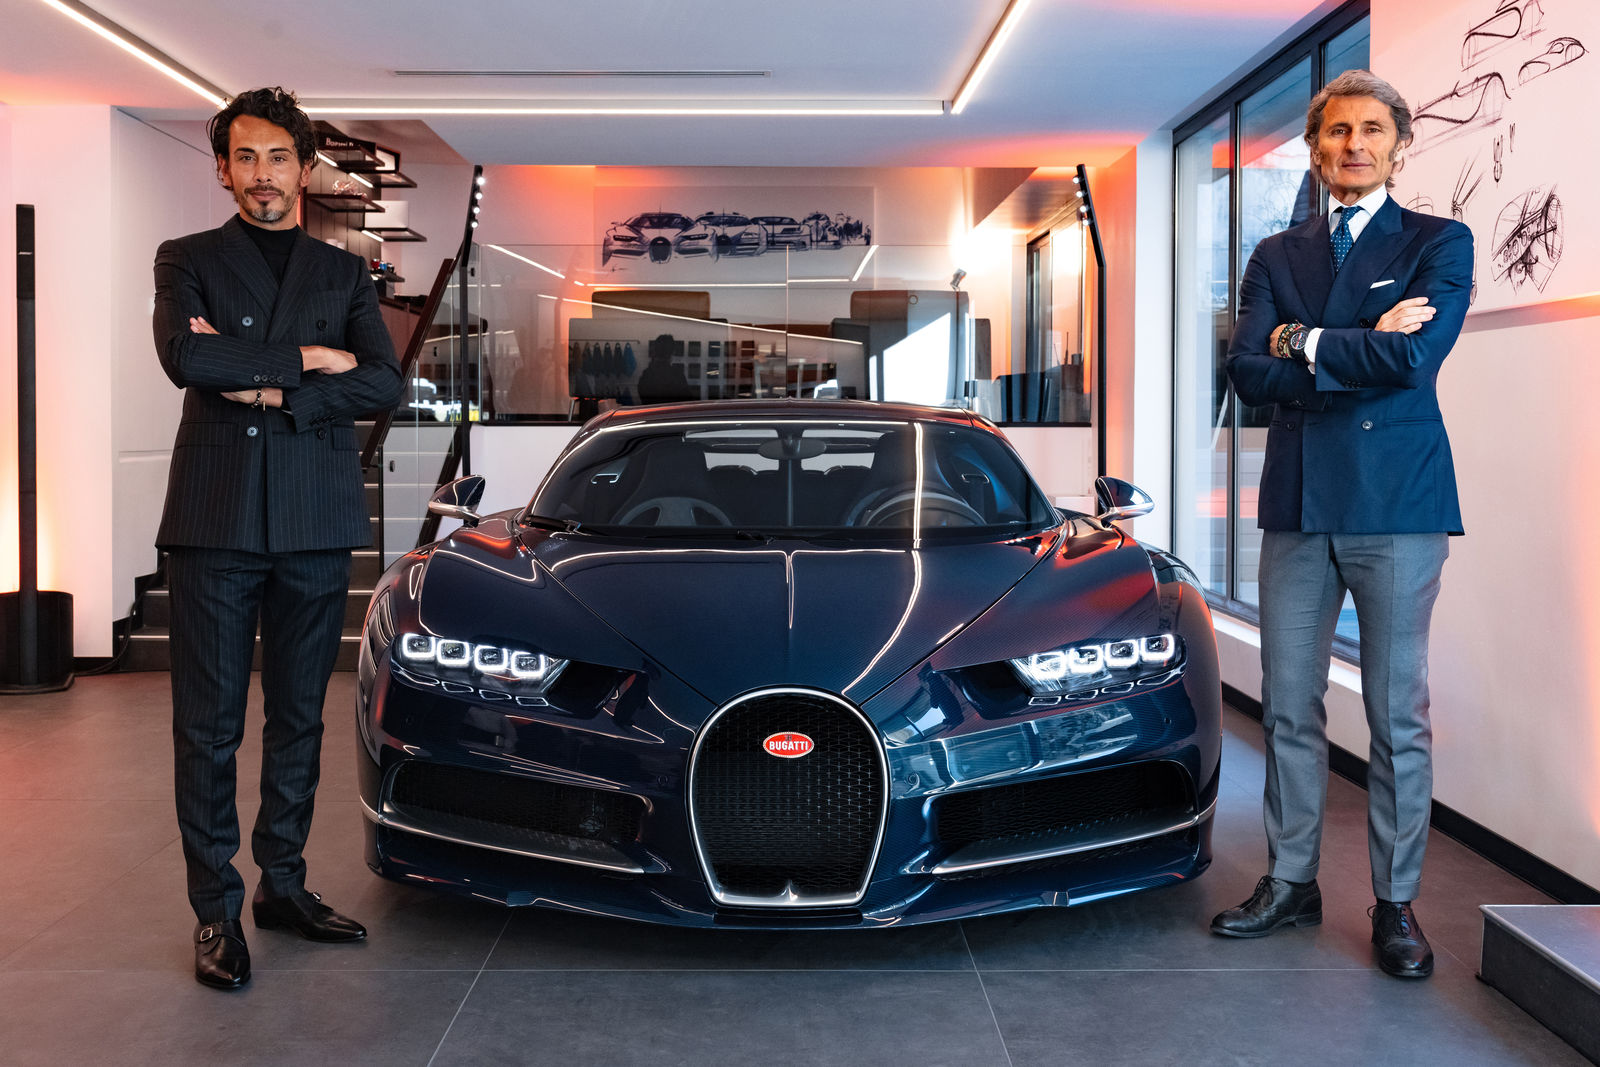 Bugatti’s new showroom in Paris features the new corporate design of the French luxury brand